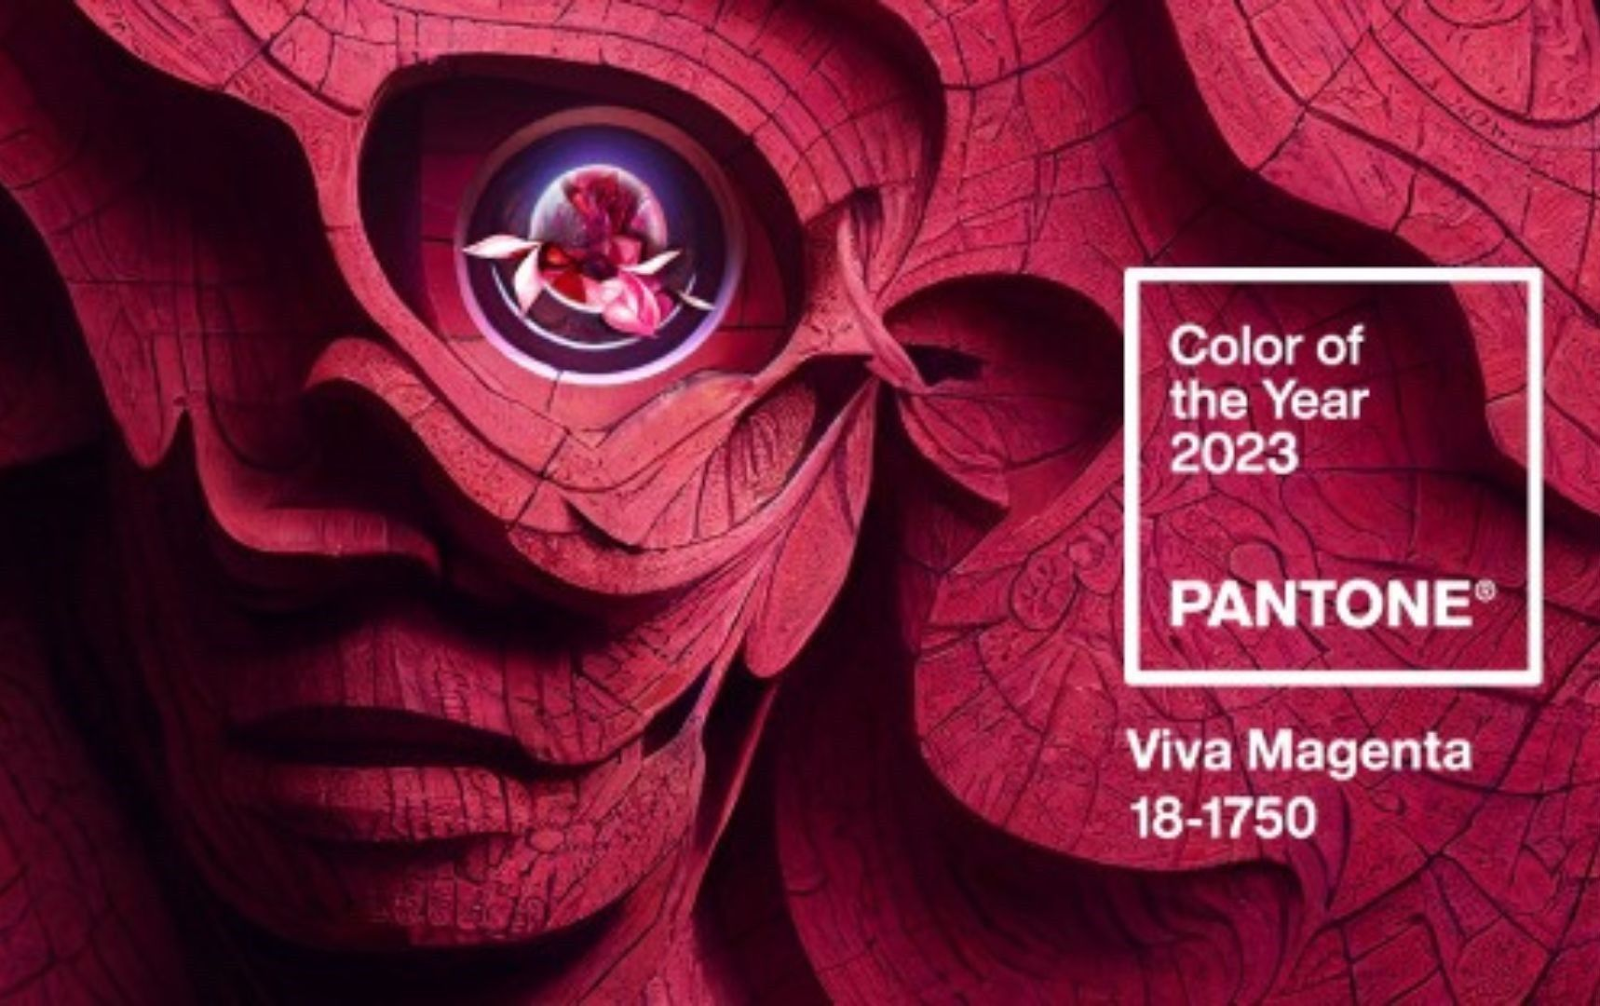 The Pantone color of 2023